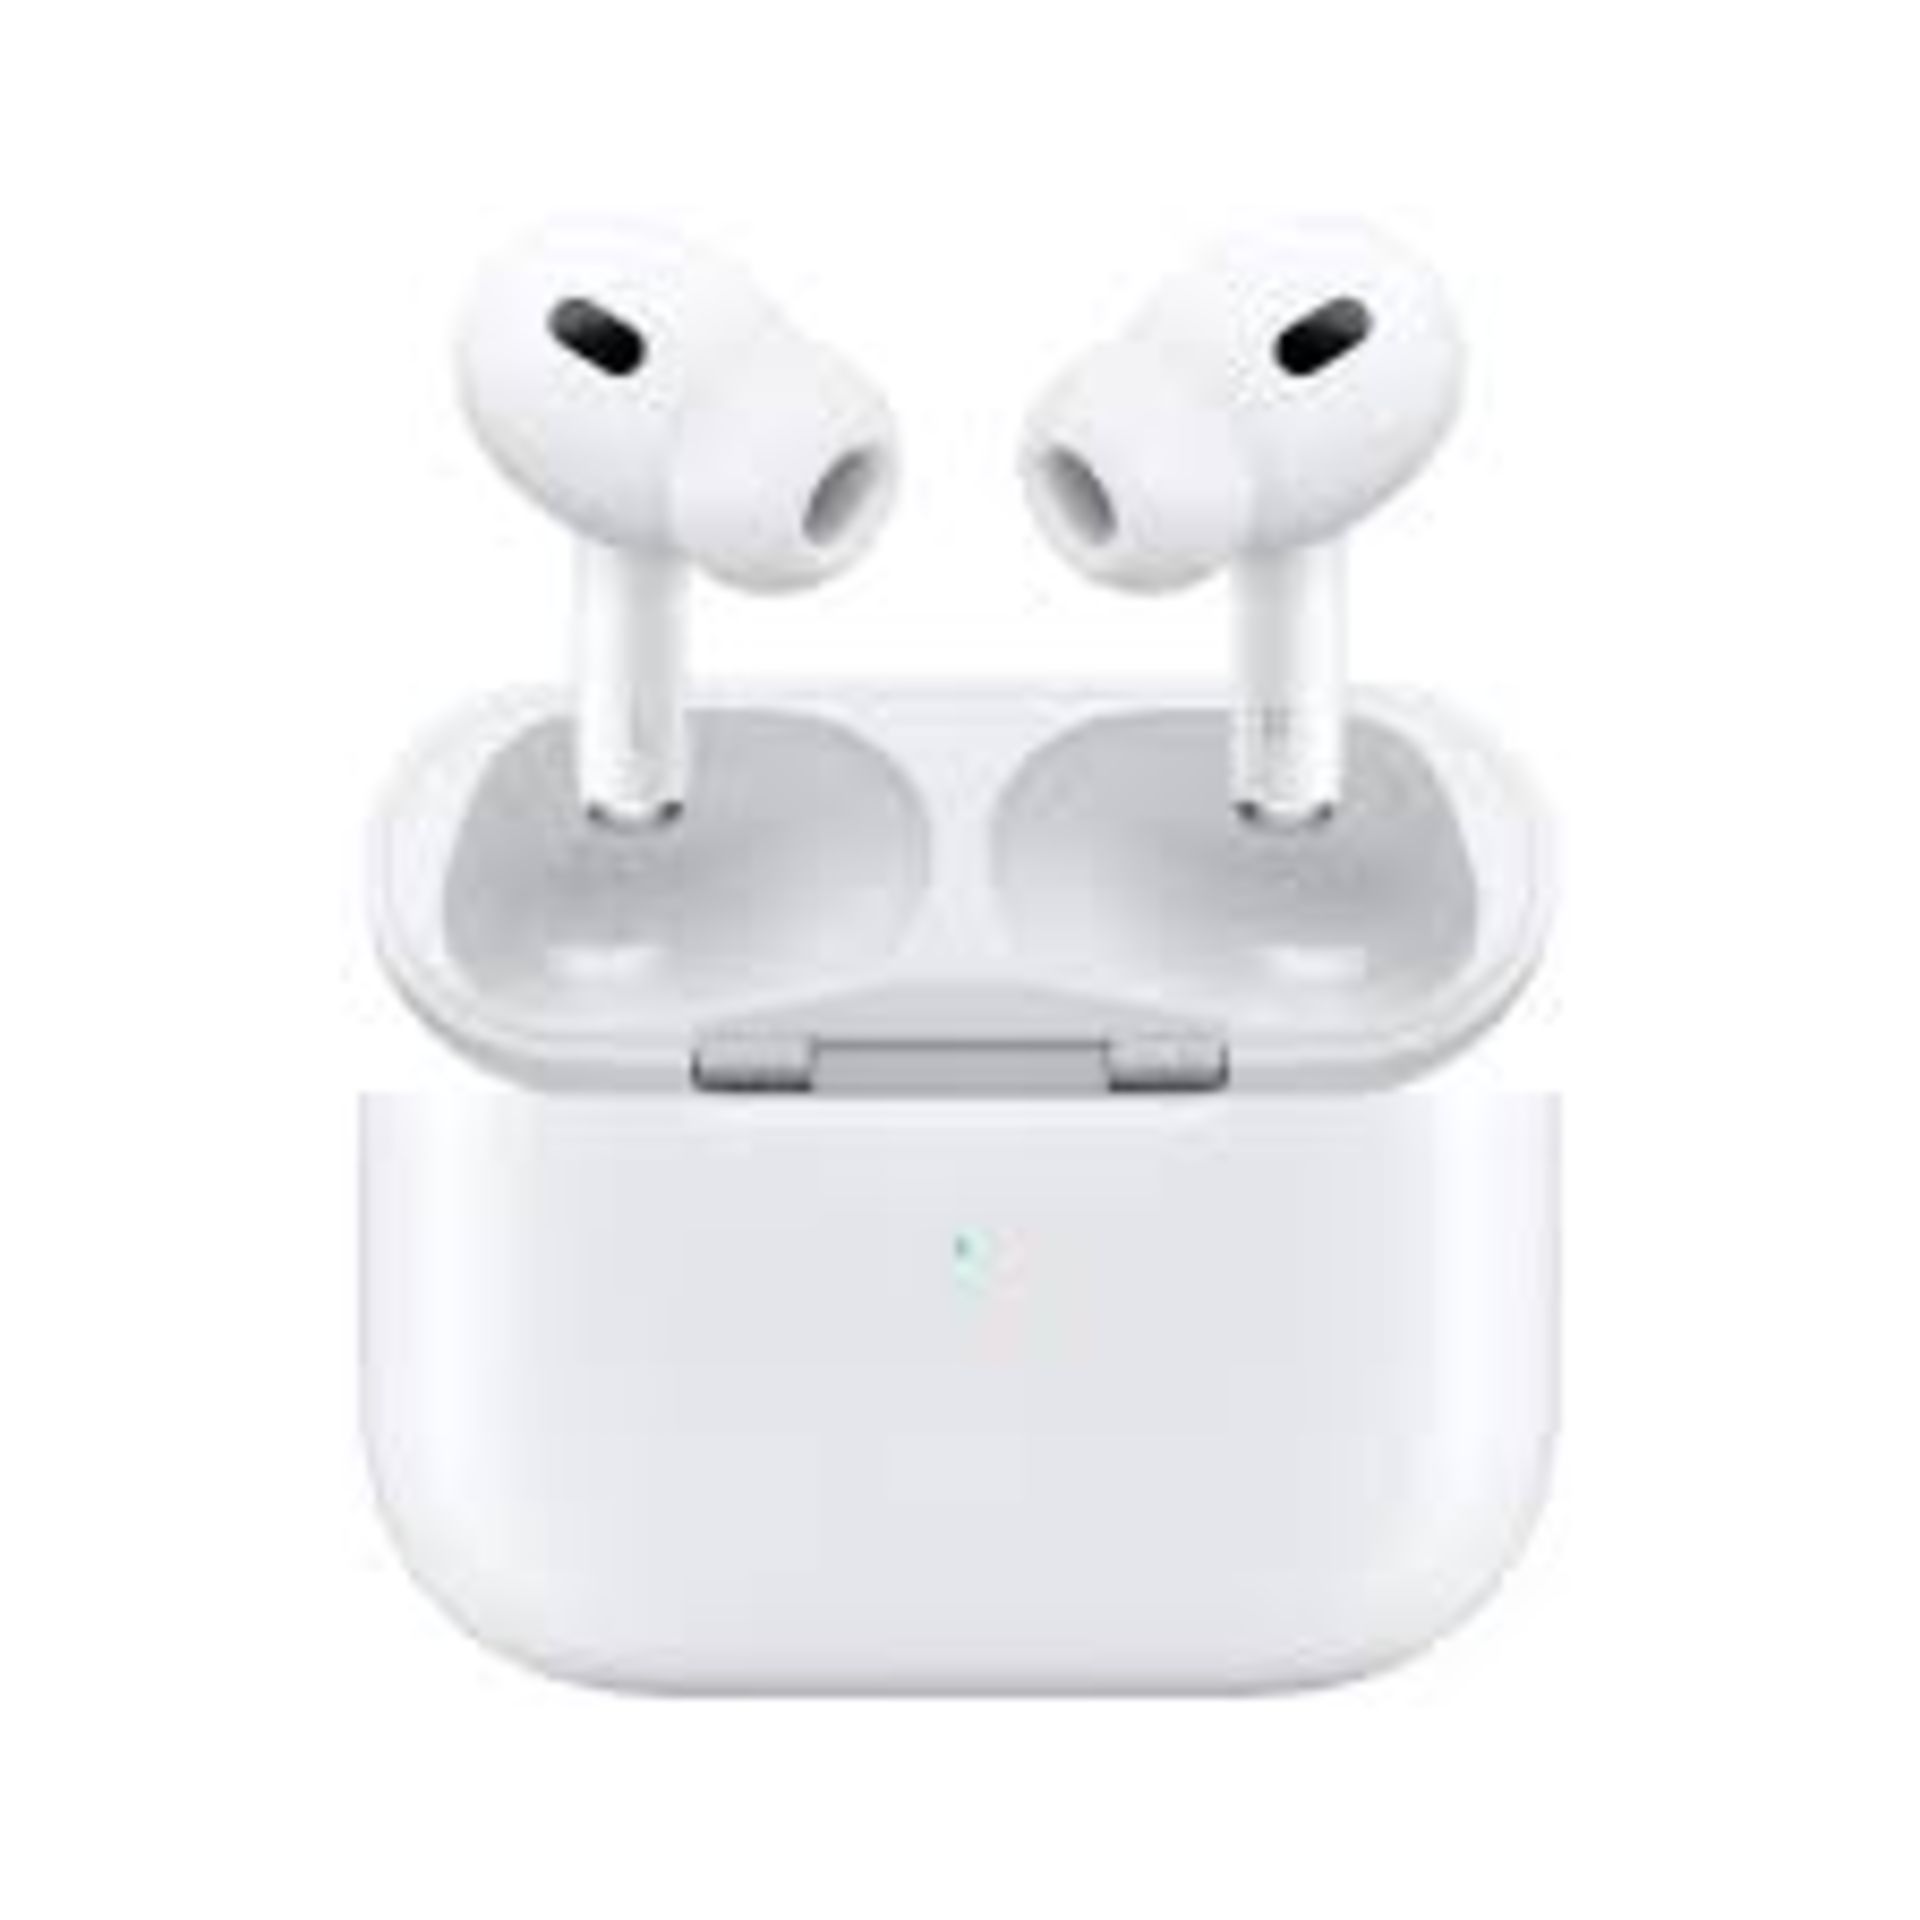 Apple Airpods Pro - PCK4